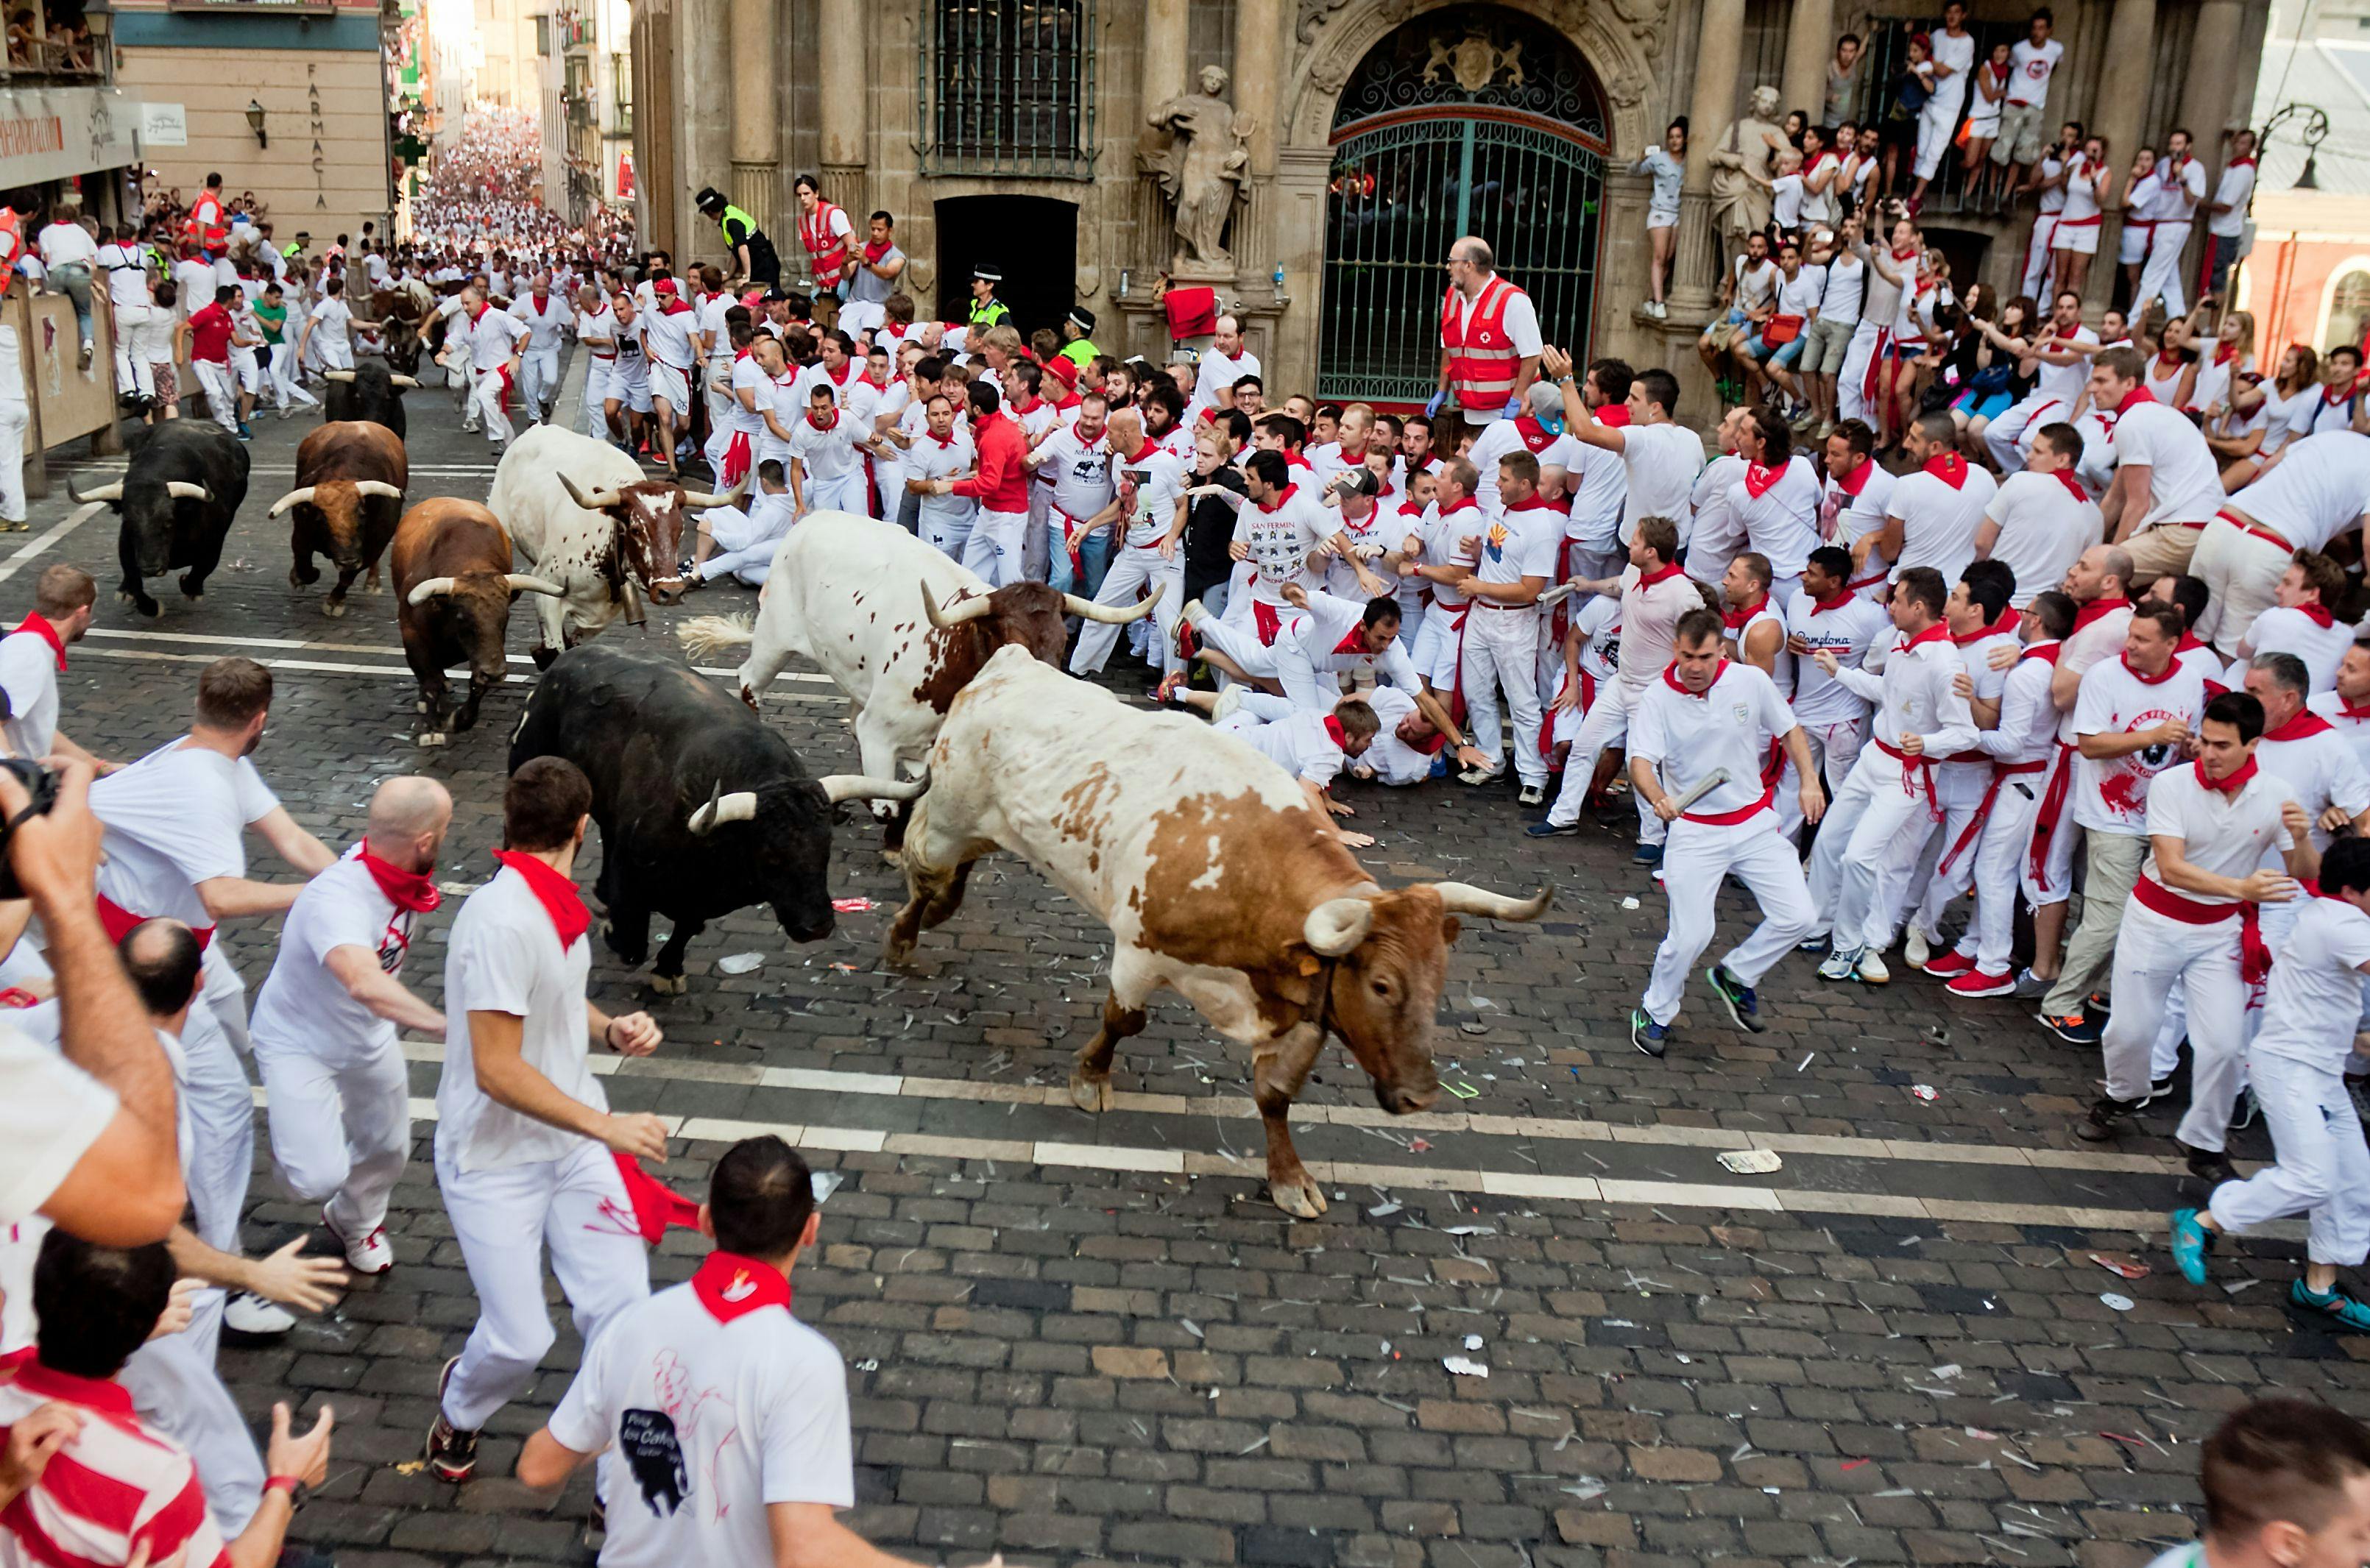  Vibrant Cultural Festivals in Spain  - Running of the bulls in Pamplona - RatePunk